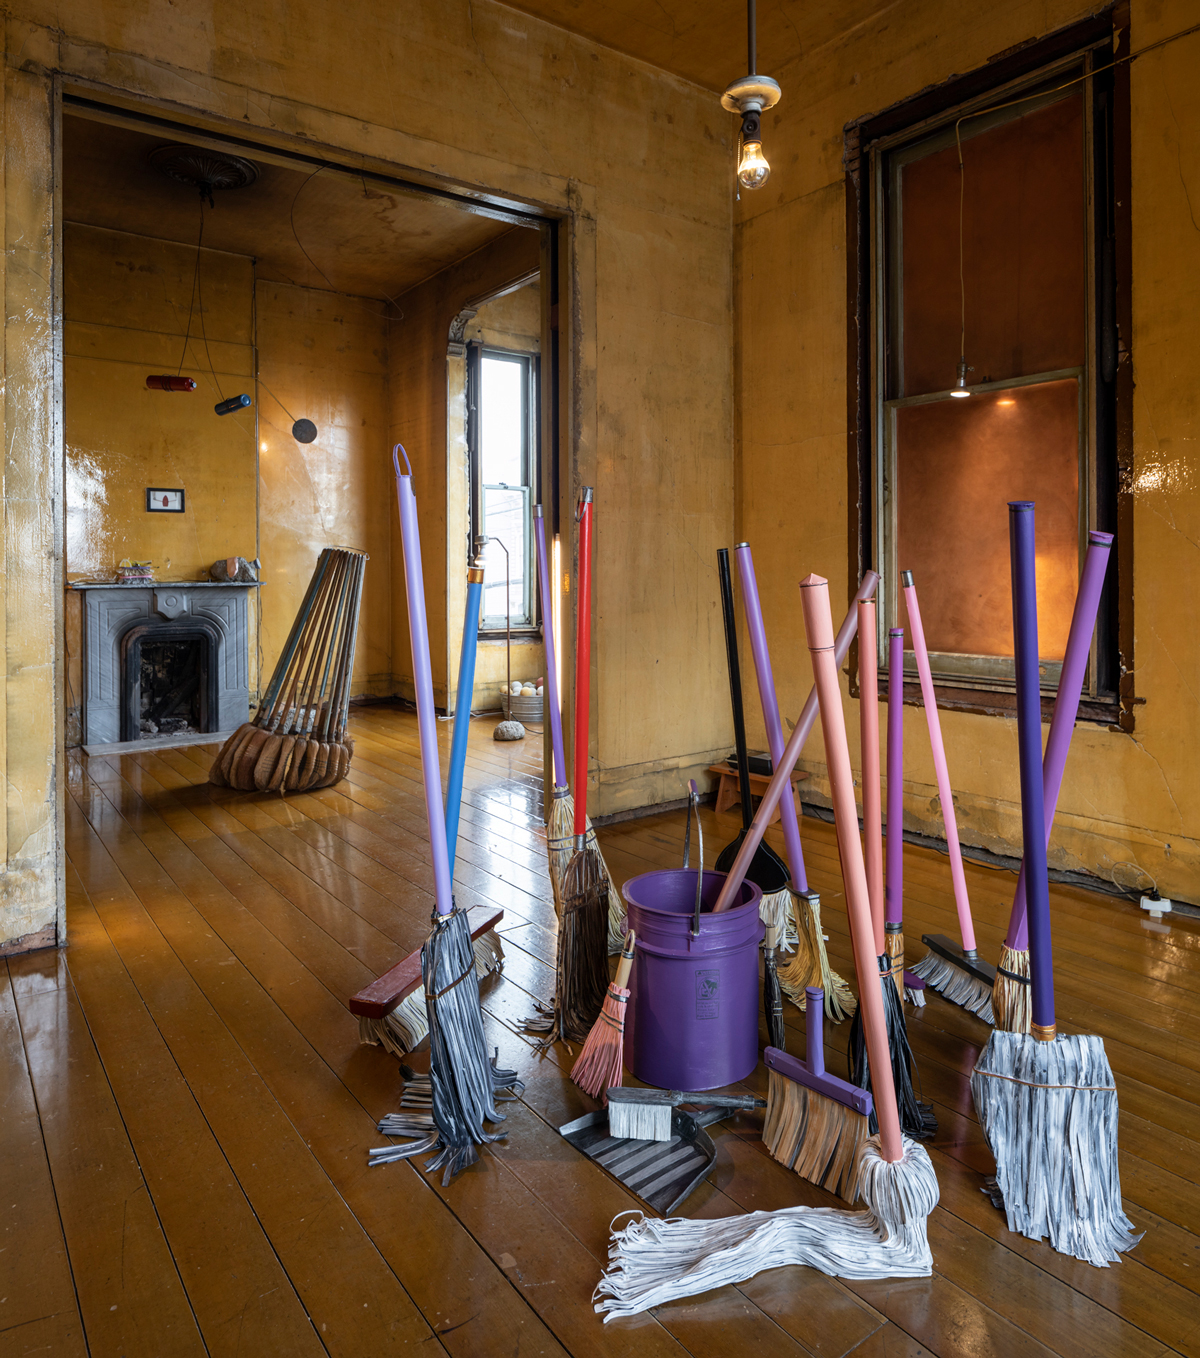 Paper painted brooms stand upright in foreground, leaning broom sculpture in background